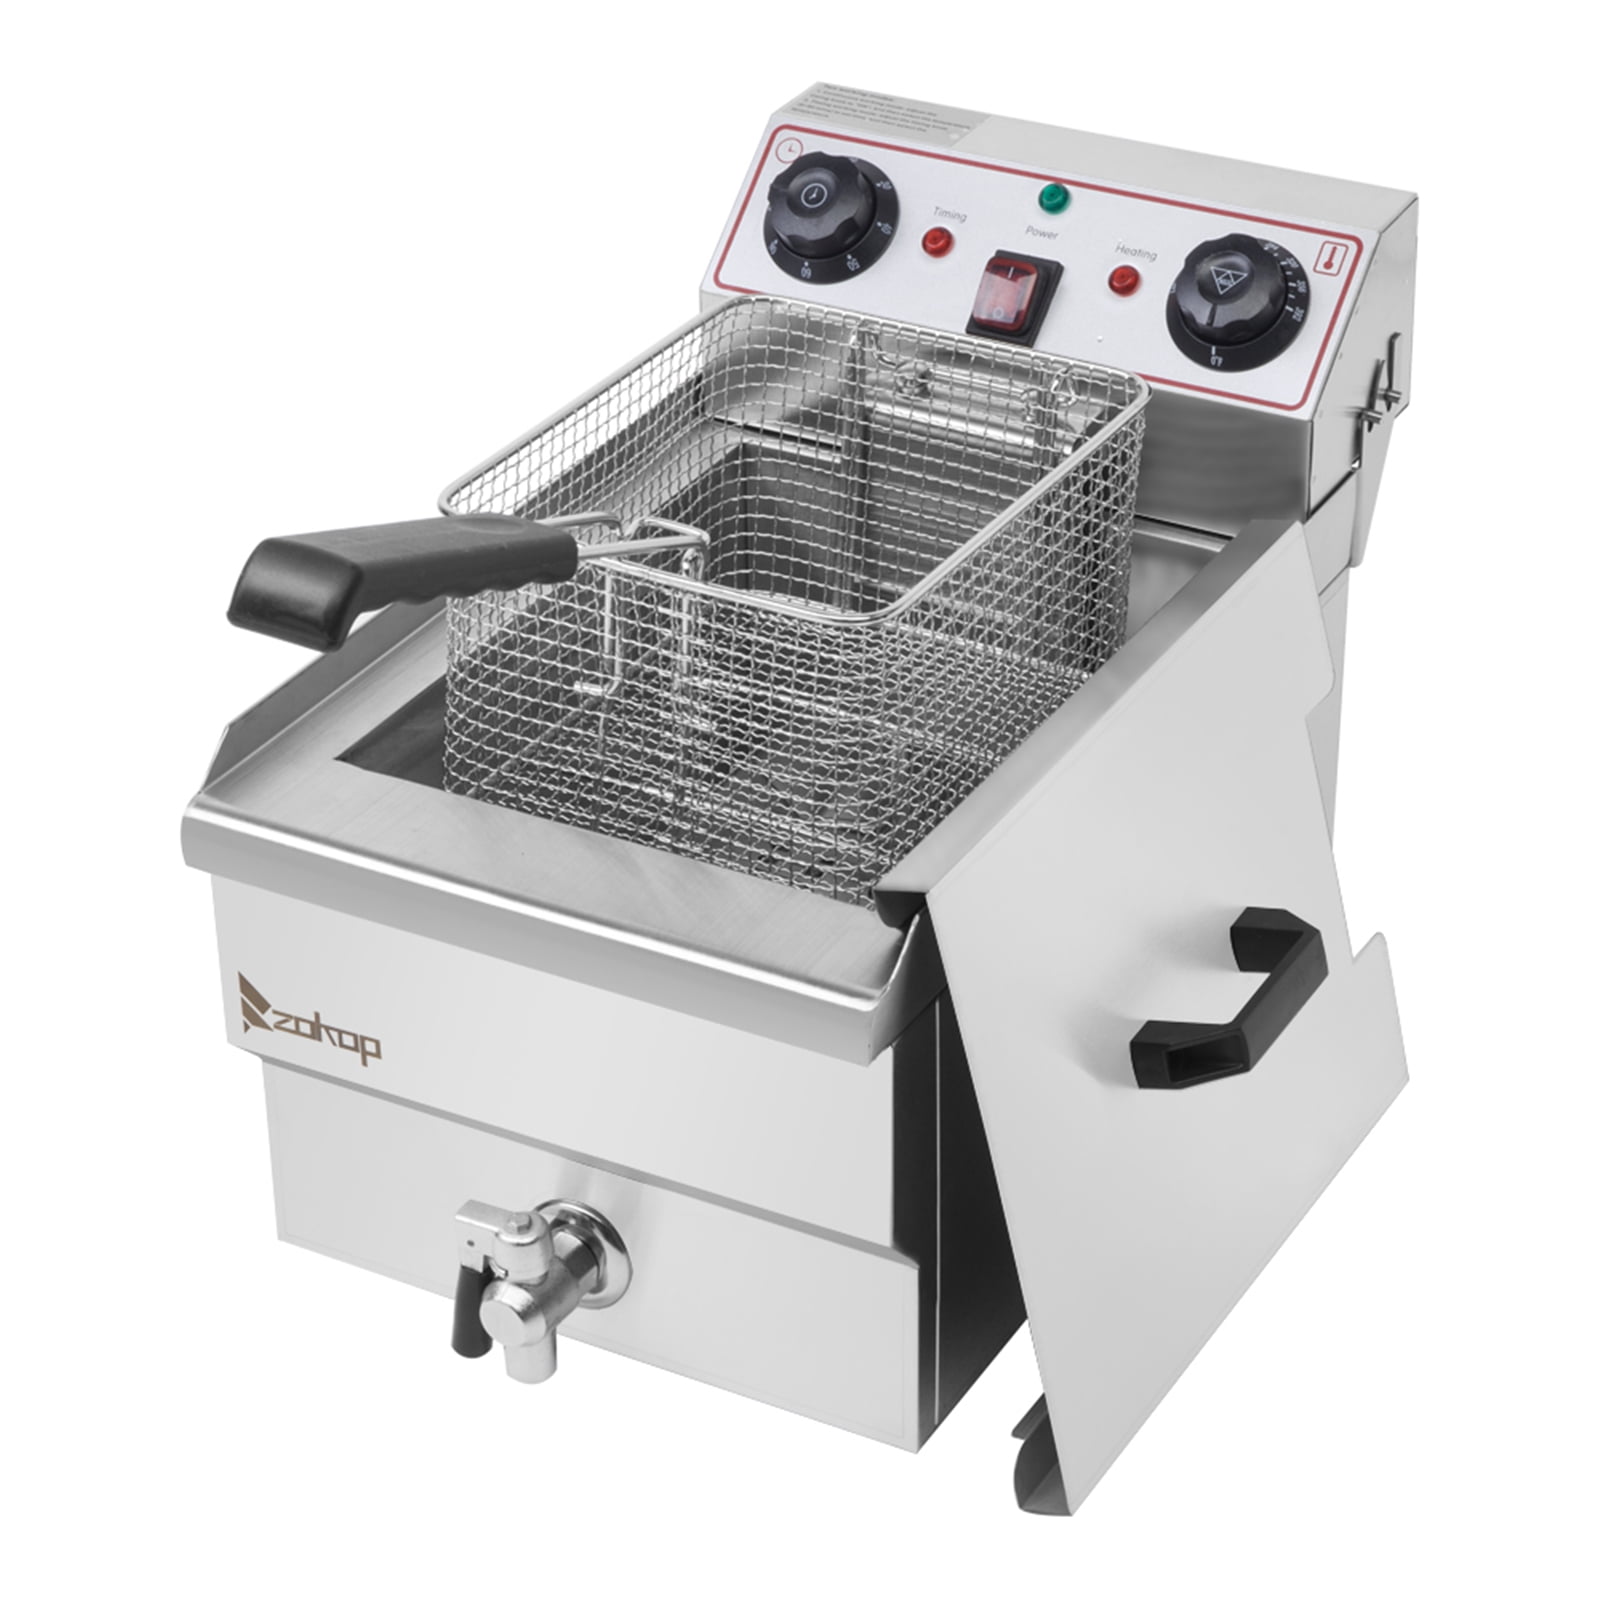 Gymax 1700W Deep Fryer Electric Commercial Tabletop Restaurant